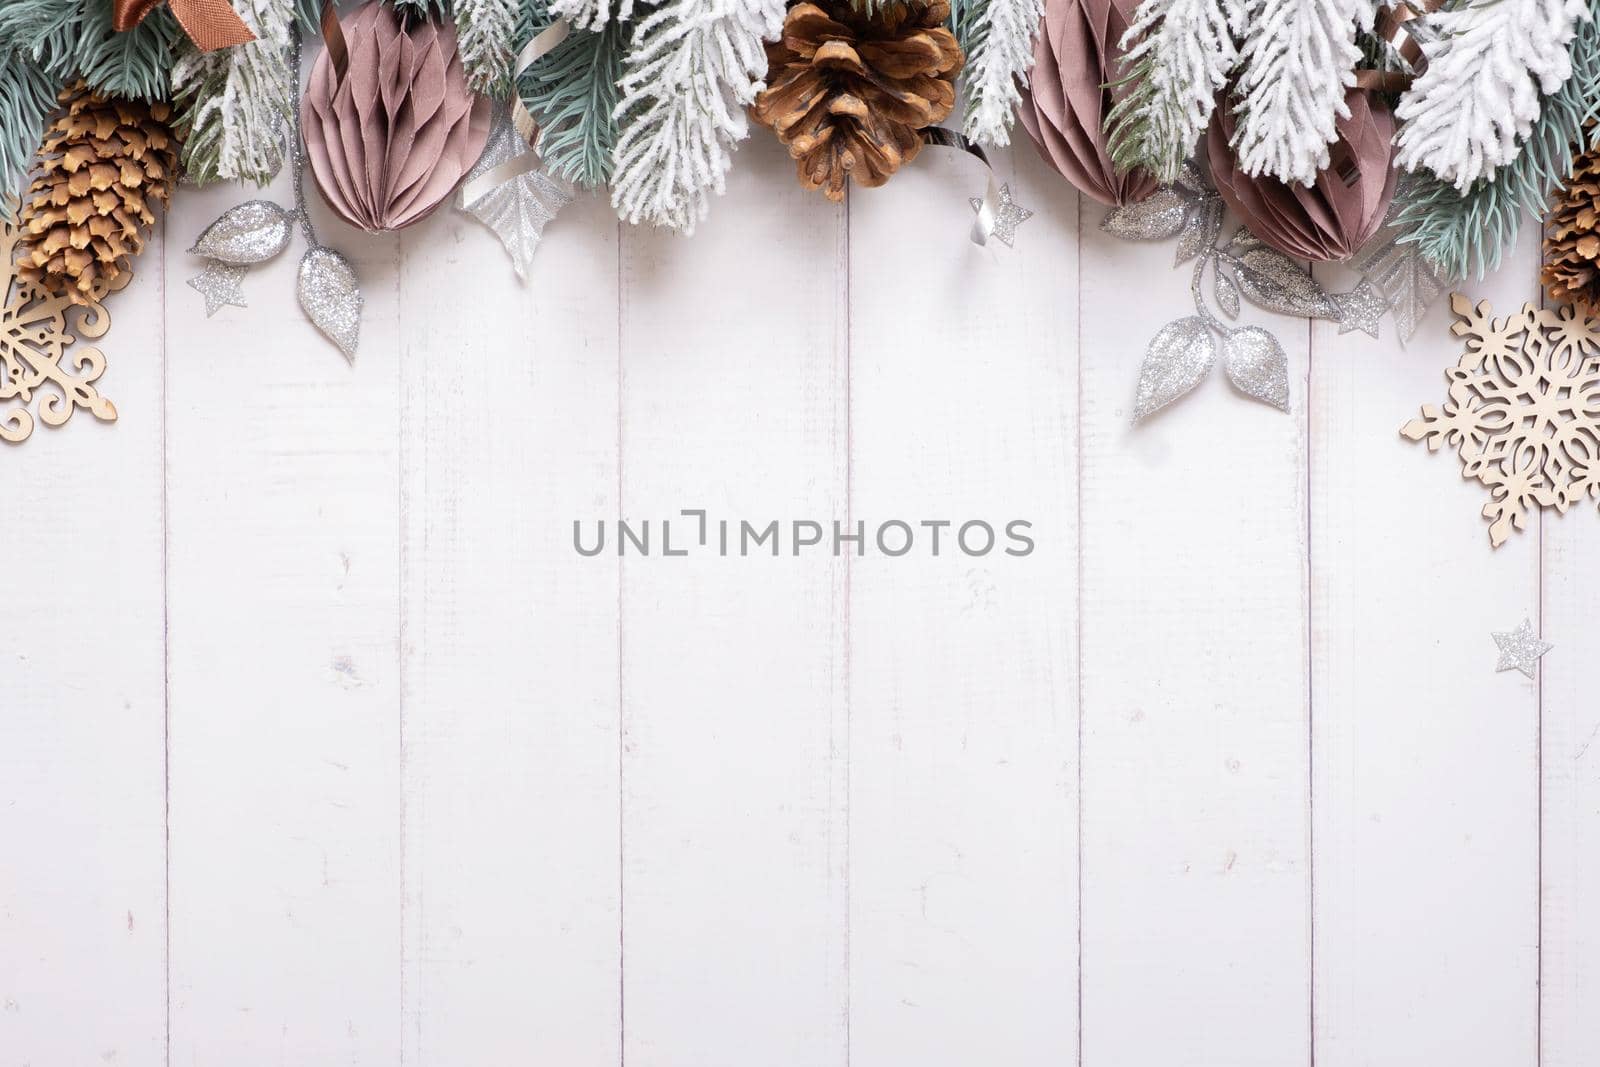 Christmas flat lay composition from pine, cones, balls on wooden background top view. Copy space.